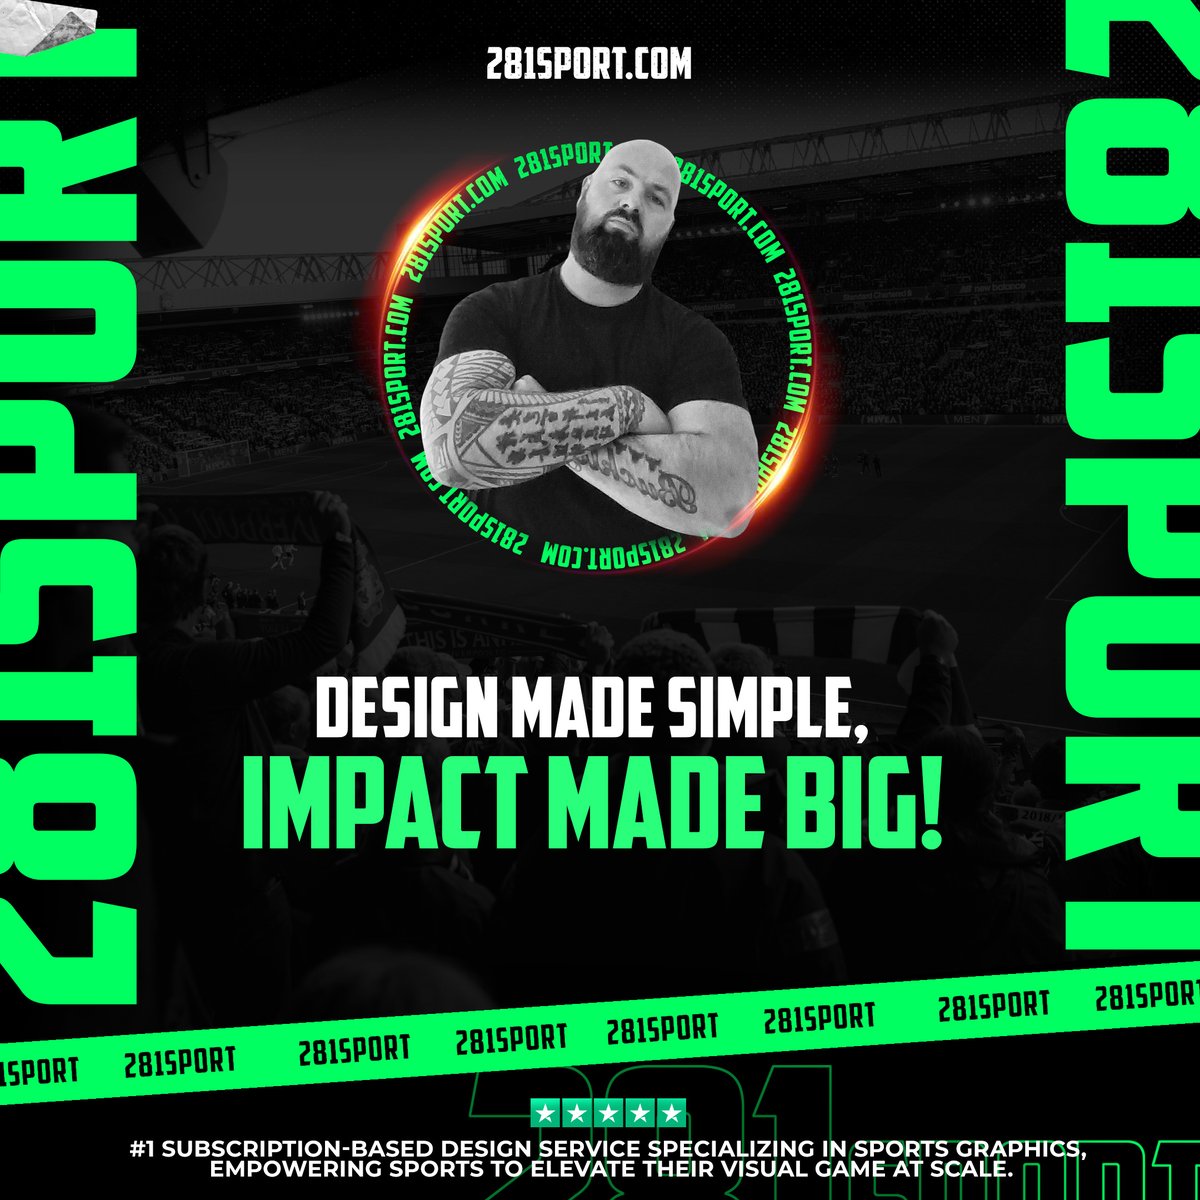 Design made simple, impact made big. Subscribe, submit, and soar with 281sport.com. #DesignSimplified